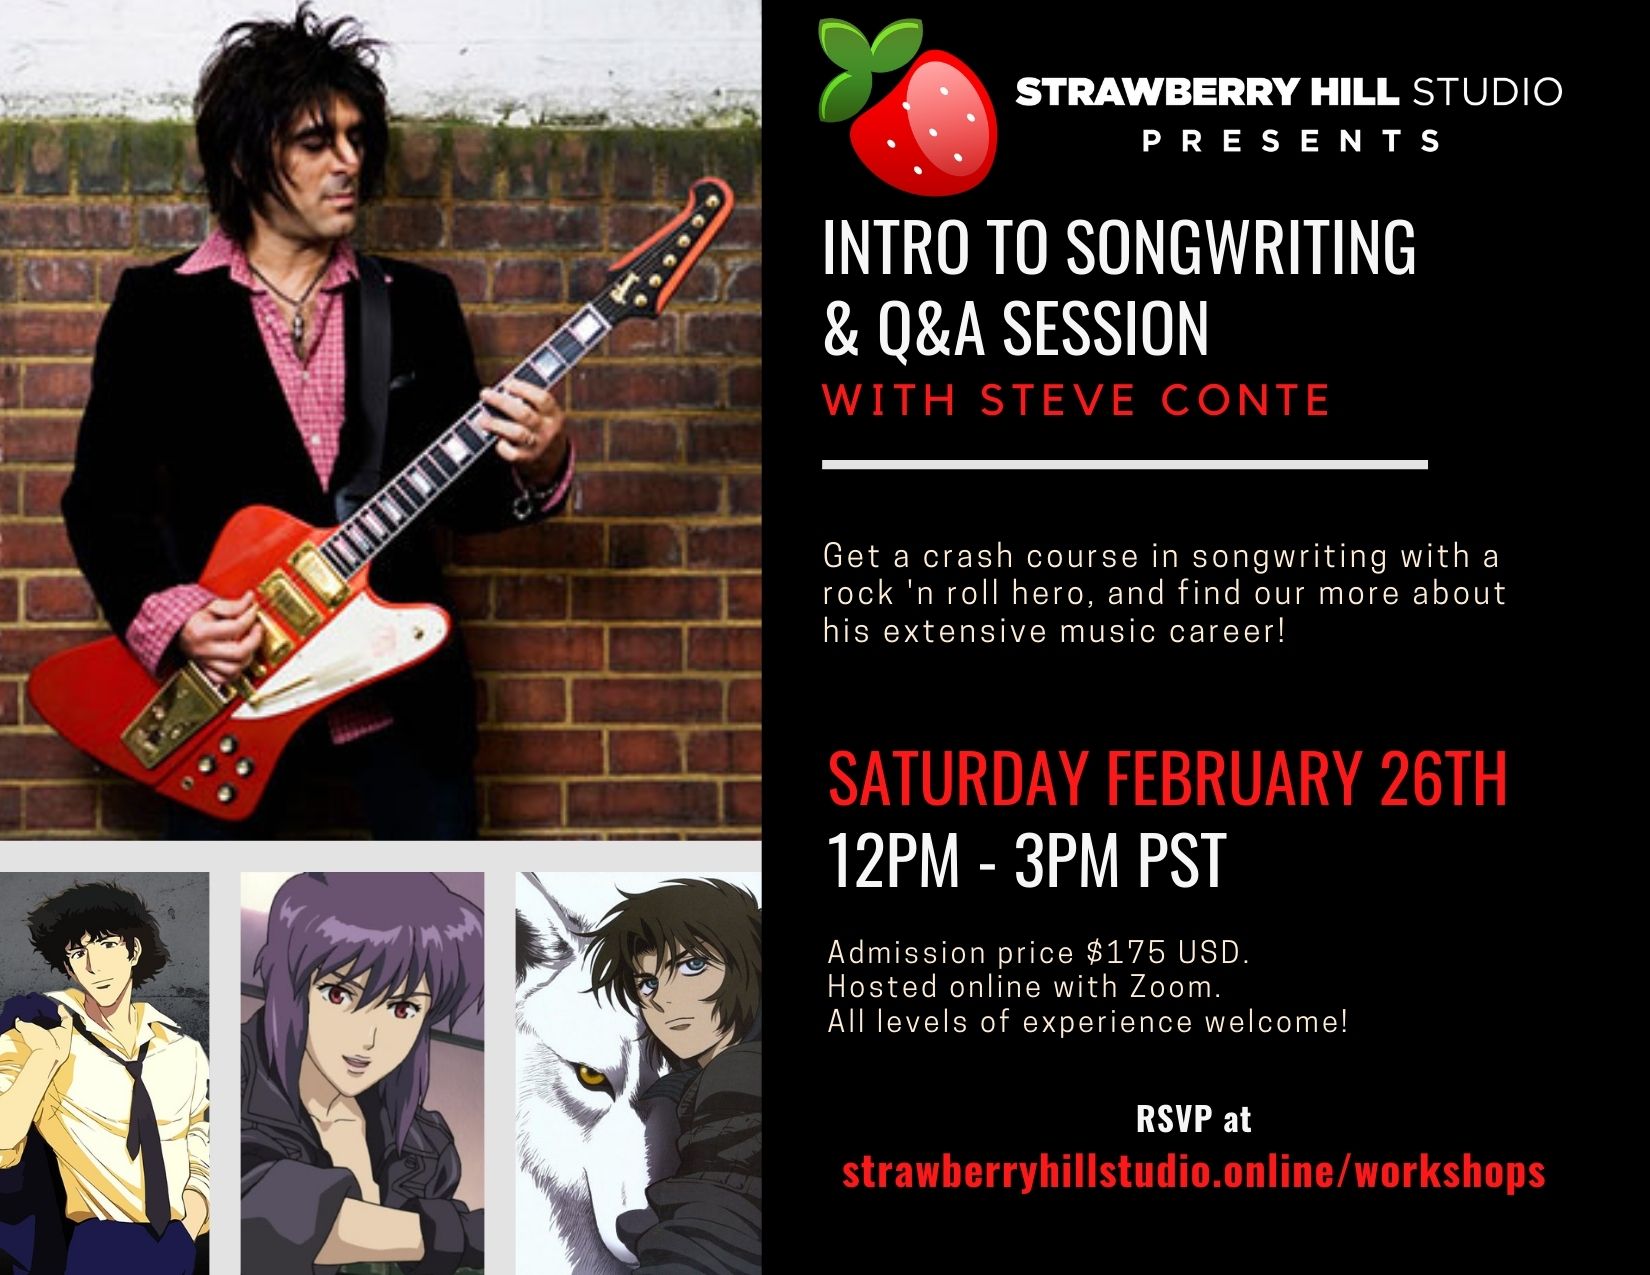 Intro to Songwriting & Q&A Session w/ Steve Conte